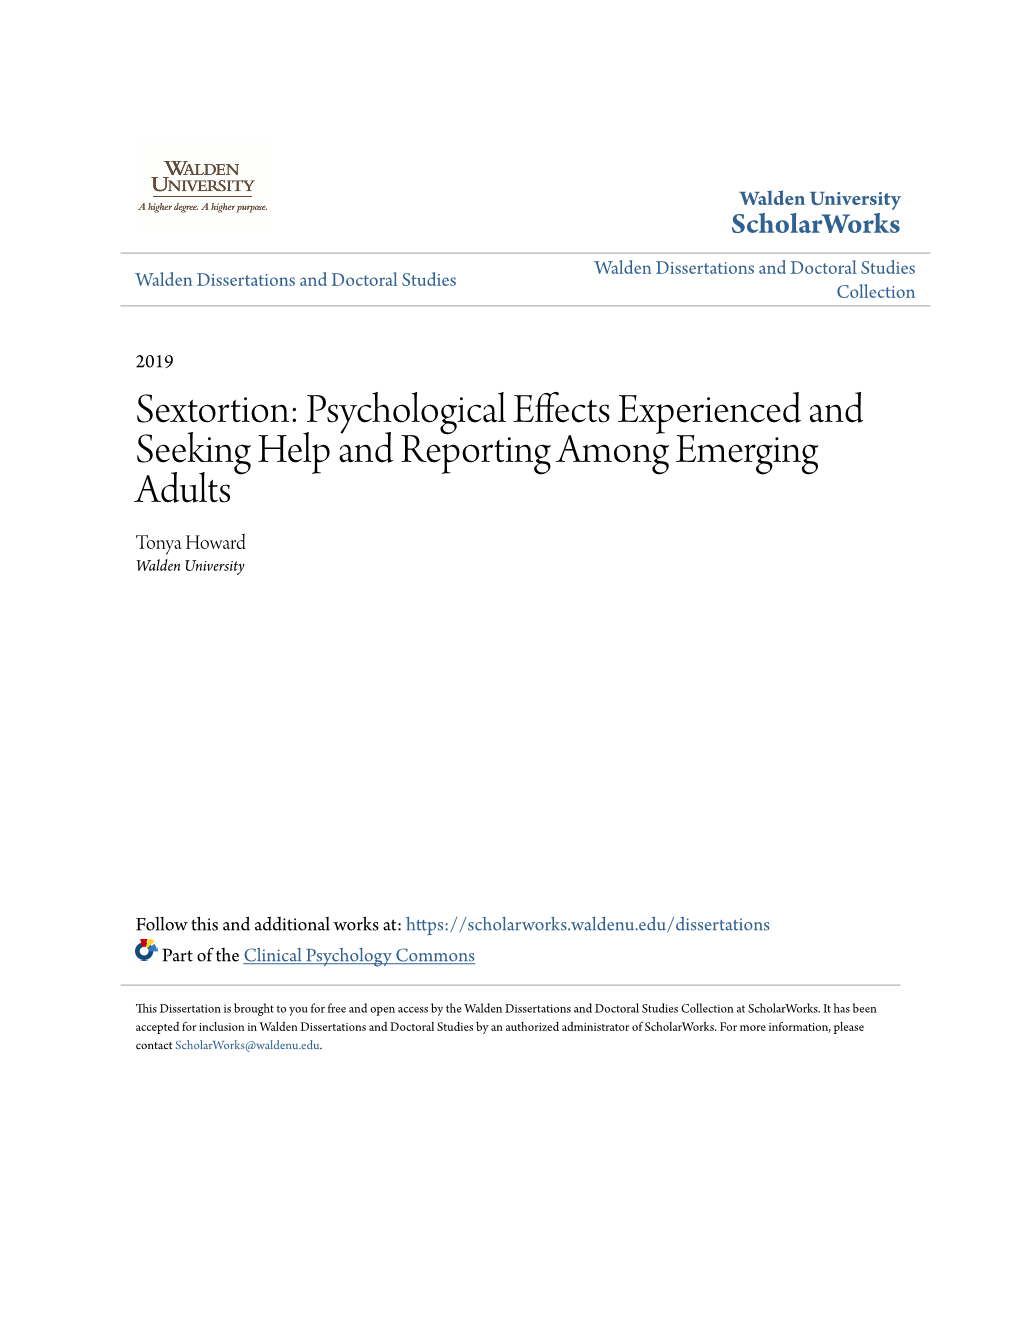 Sextortion: Psychological Effects Experienced and Seeking Help and Reporting Among Emerging Adults Tonya Howard Walden University